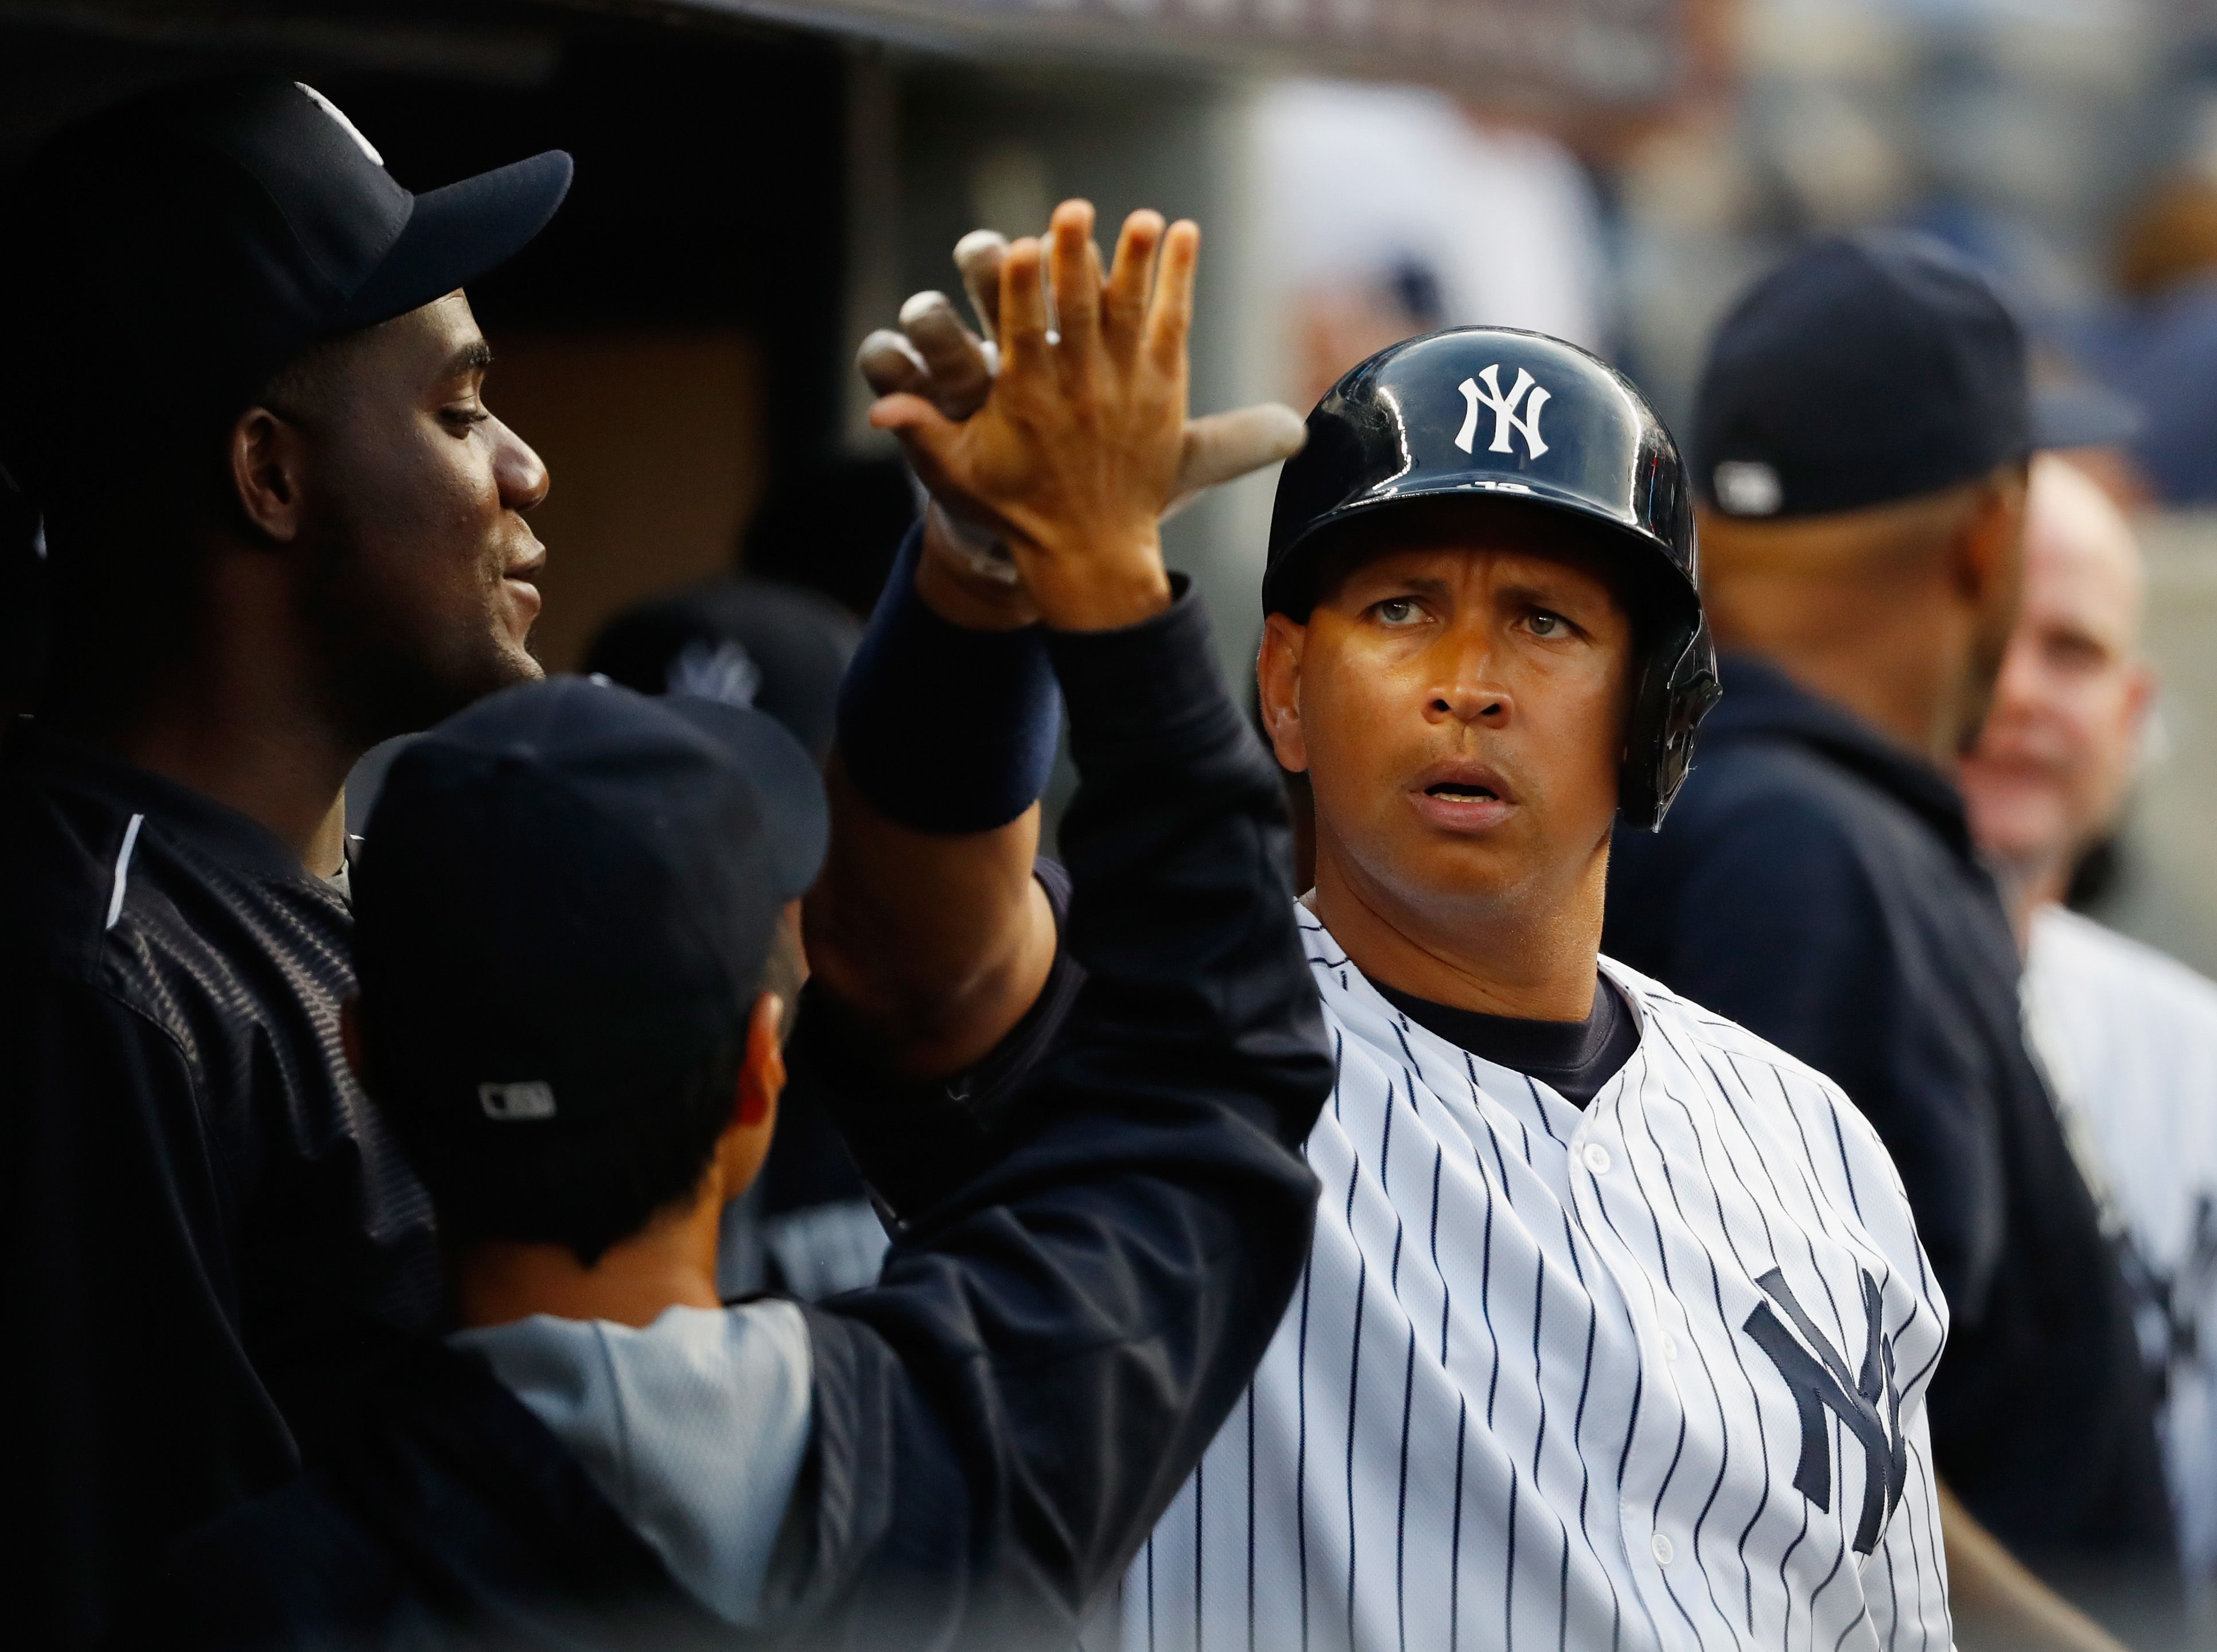 Slugger Alex Rodriguez to retire, become Yankees instructor